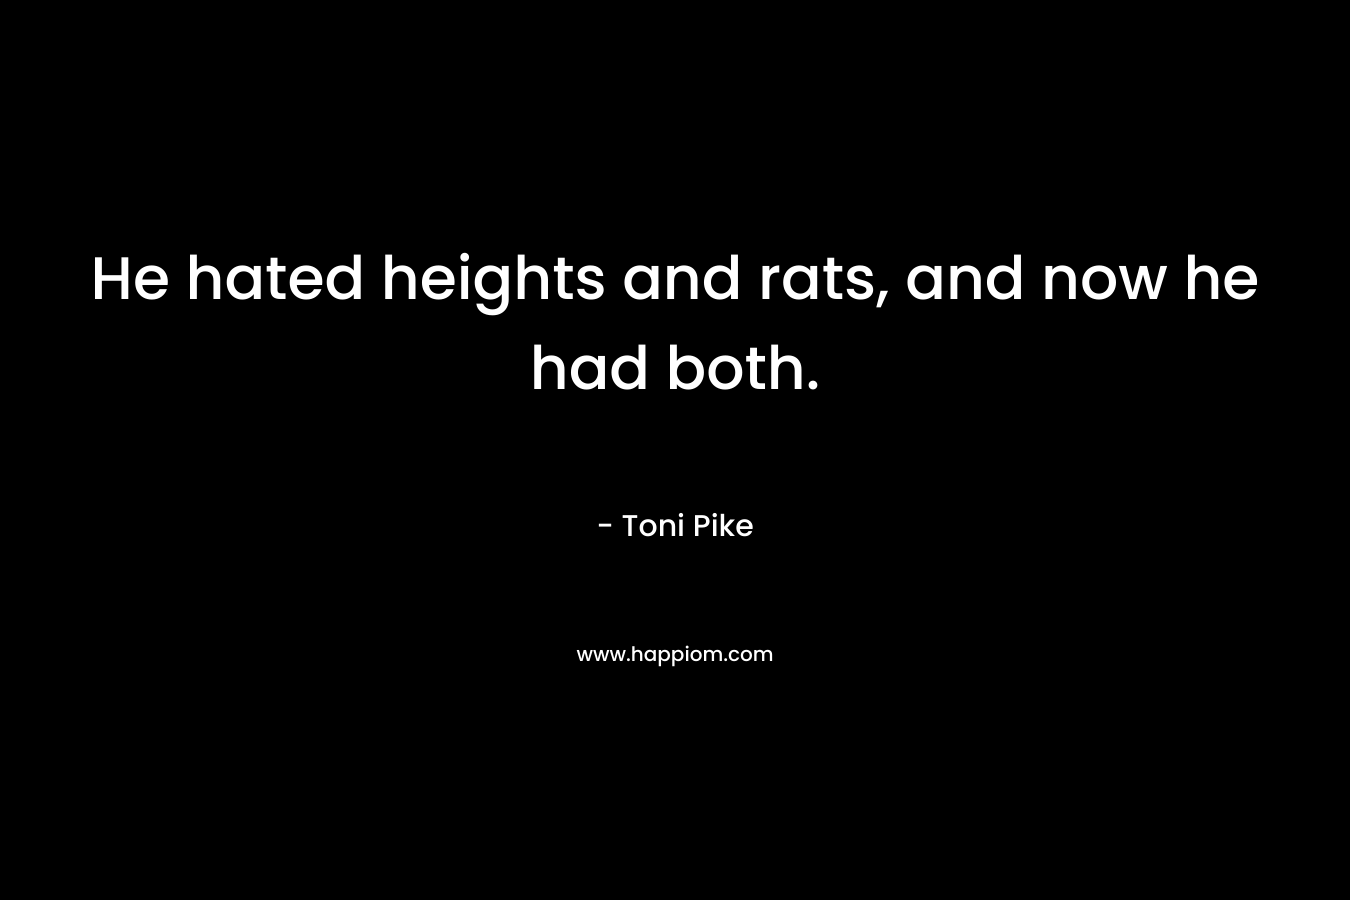 He hated heights and rats, and now he had both. – Toni Pike